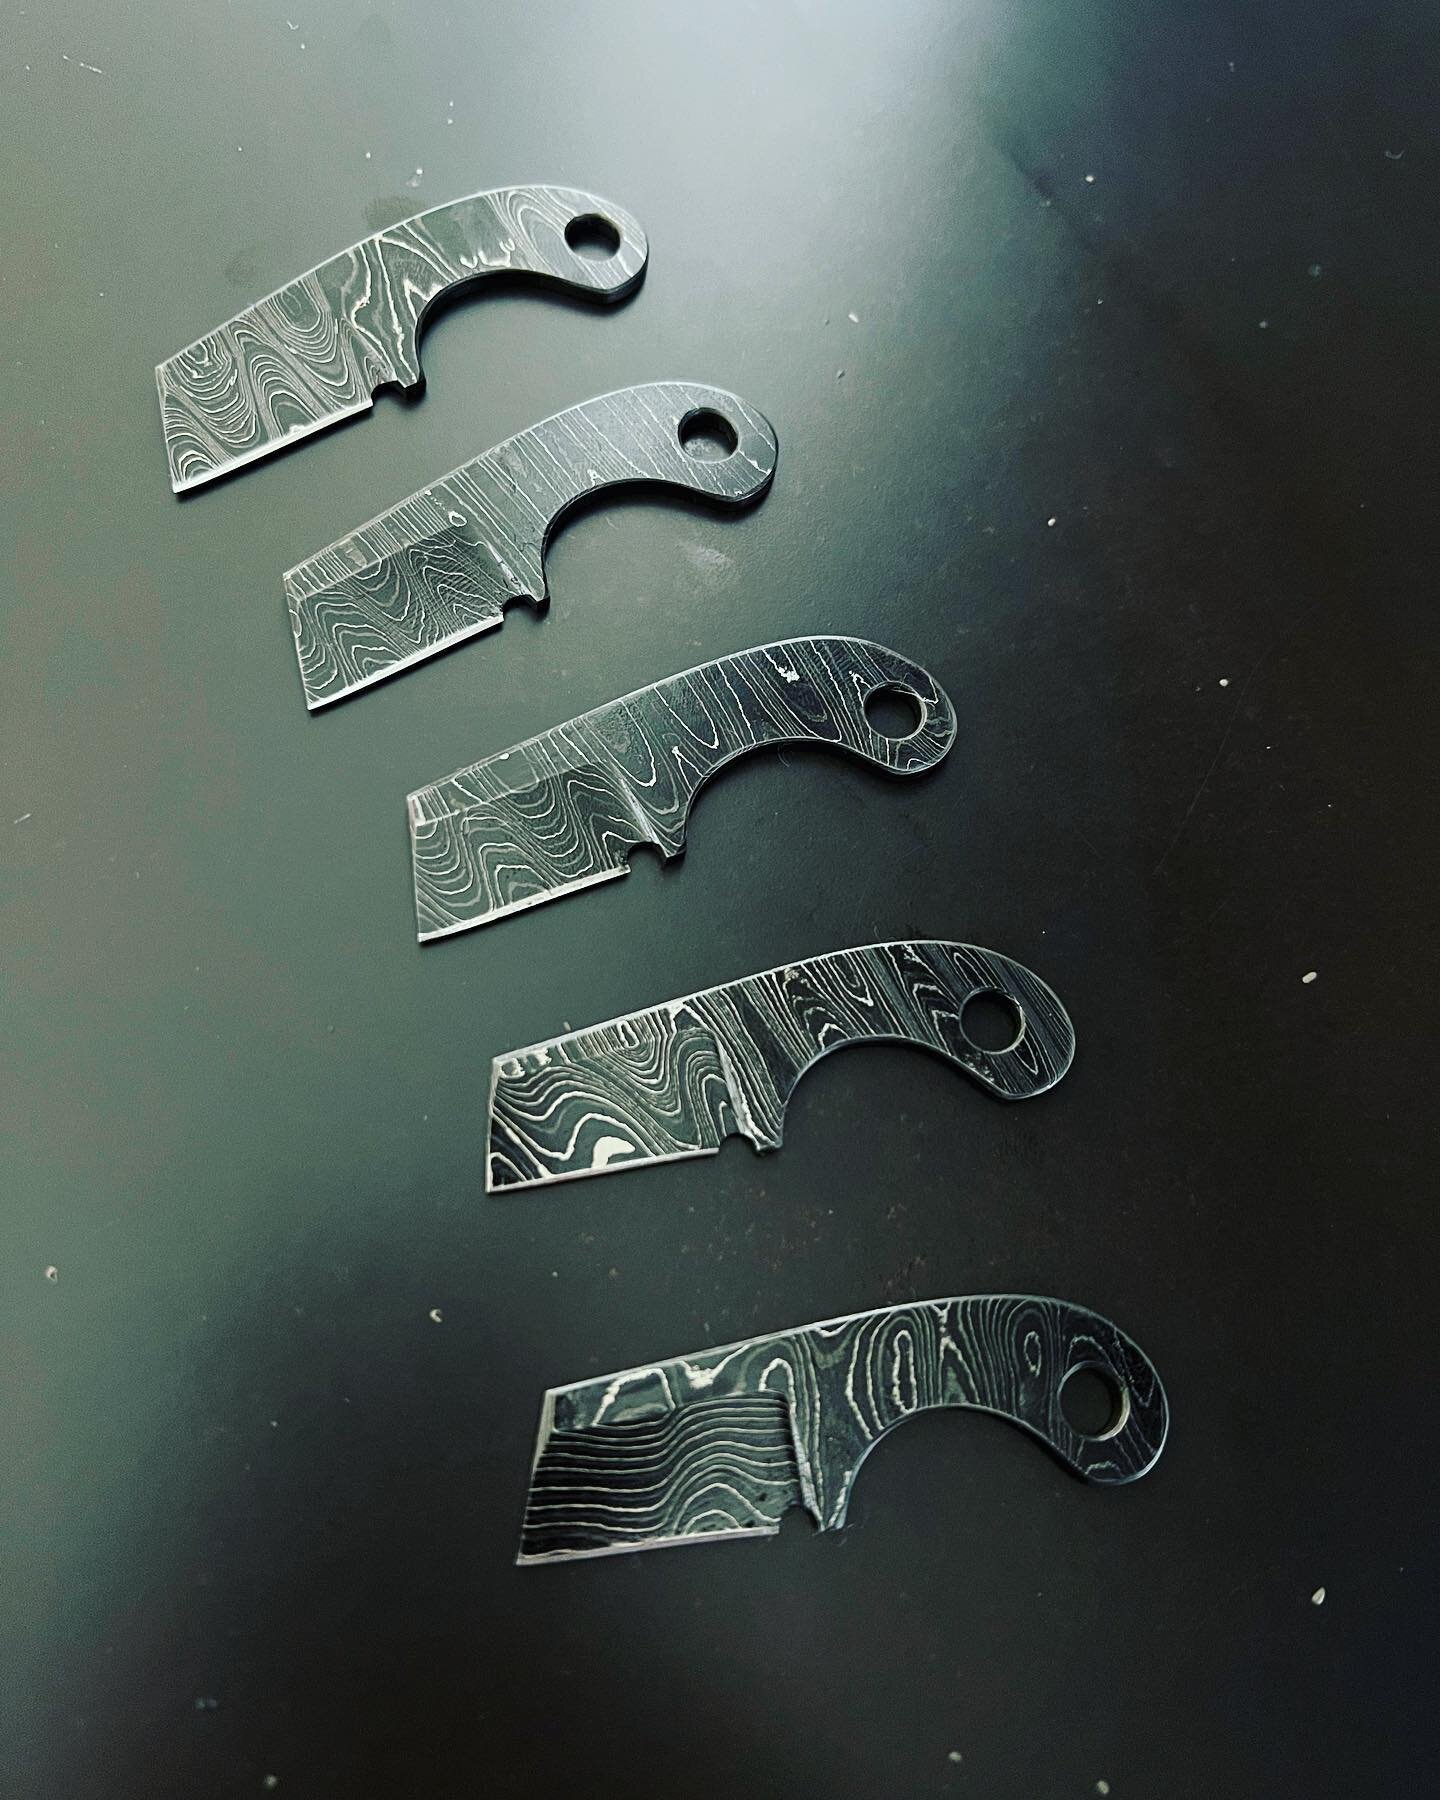 5-piece groomsmen set of Damascus Derringers that we recently put together for a custom order. These are very handy little pocket tools and make for great gifts. We carry a number of different finish options in our online store (link in bio) if you&r